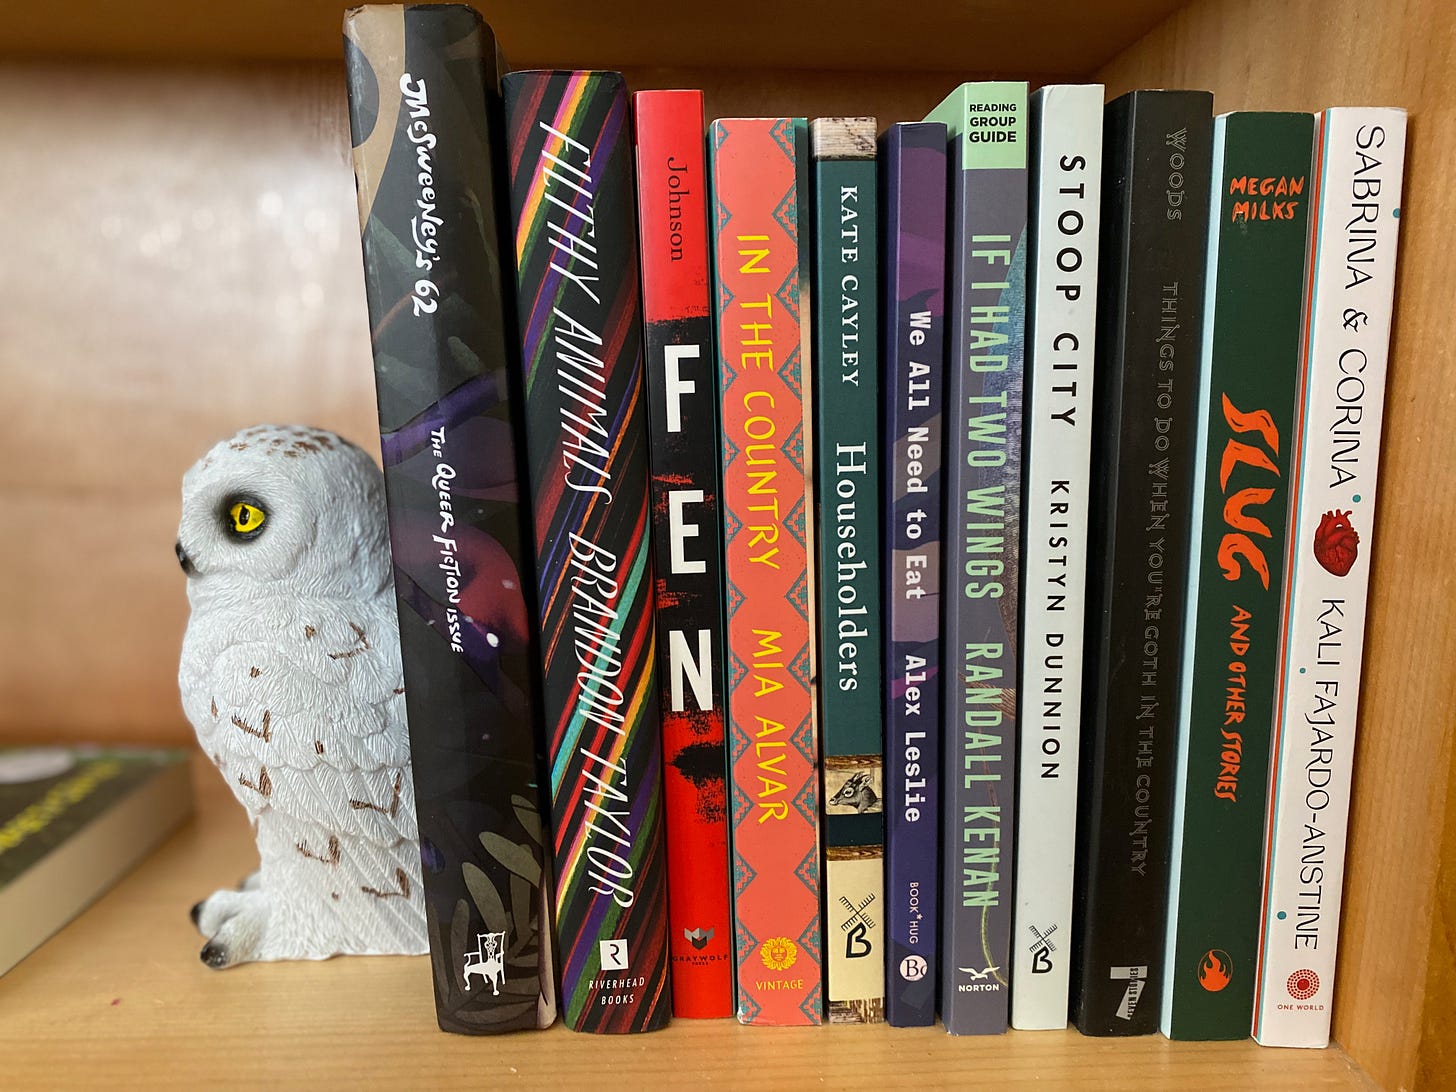 A white ceramic snowy owl bookend with yellow eyes leans against a shelf of short story collections: McSweeny’s Queer Fiction Issue, Filthy Animals, Fen, In the Country, Householders, We All Need to Eat, If I Had Two Wings, Stoop City, Things to Do When You’re Goth in the Country, Slug, Sabrina & Corina.